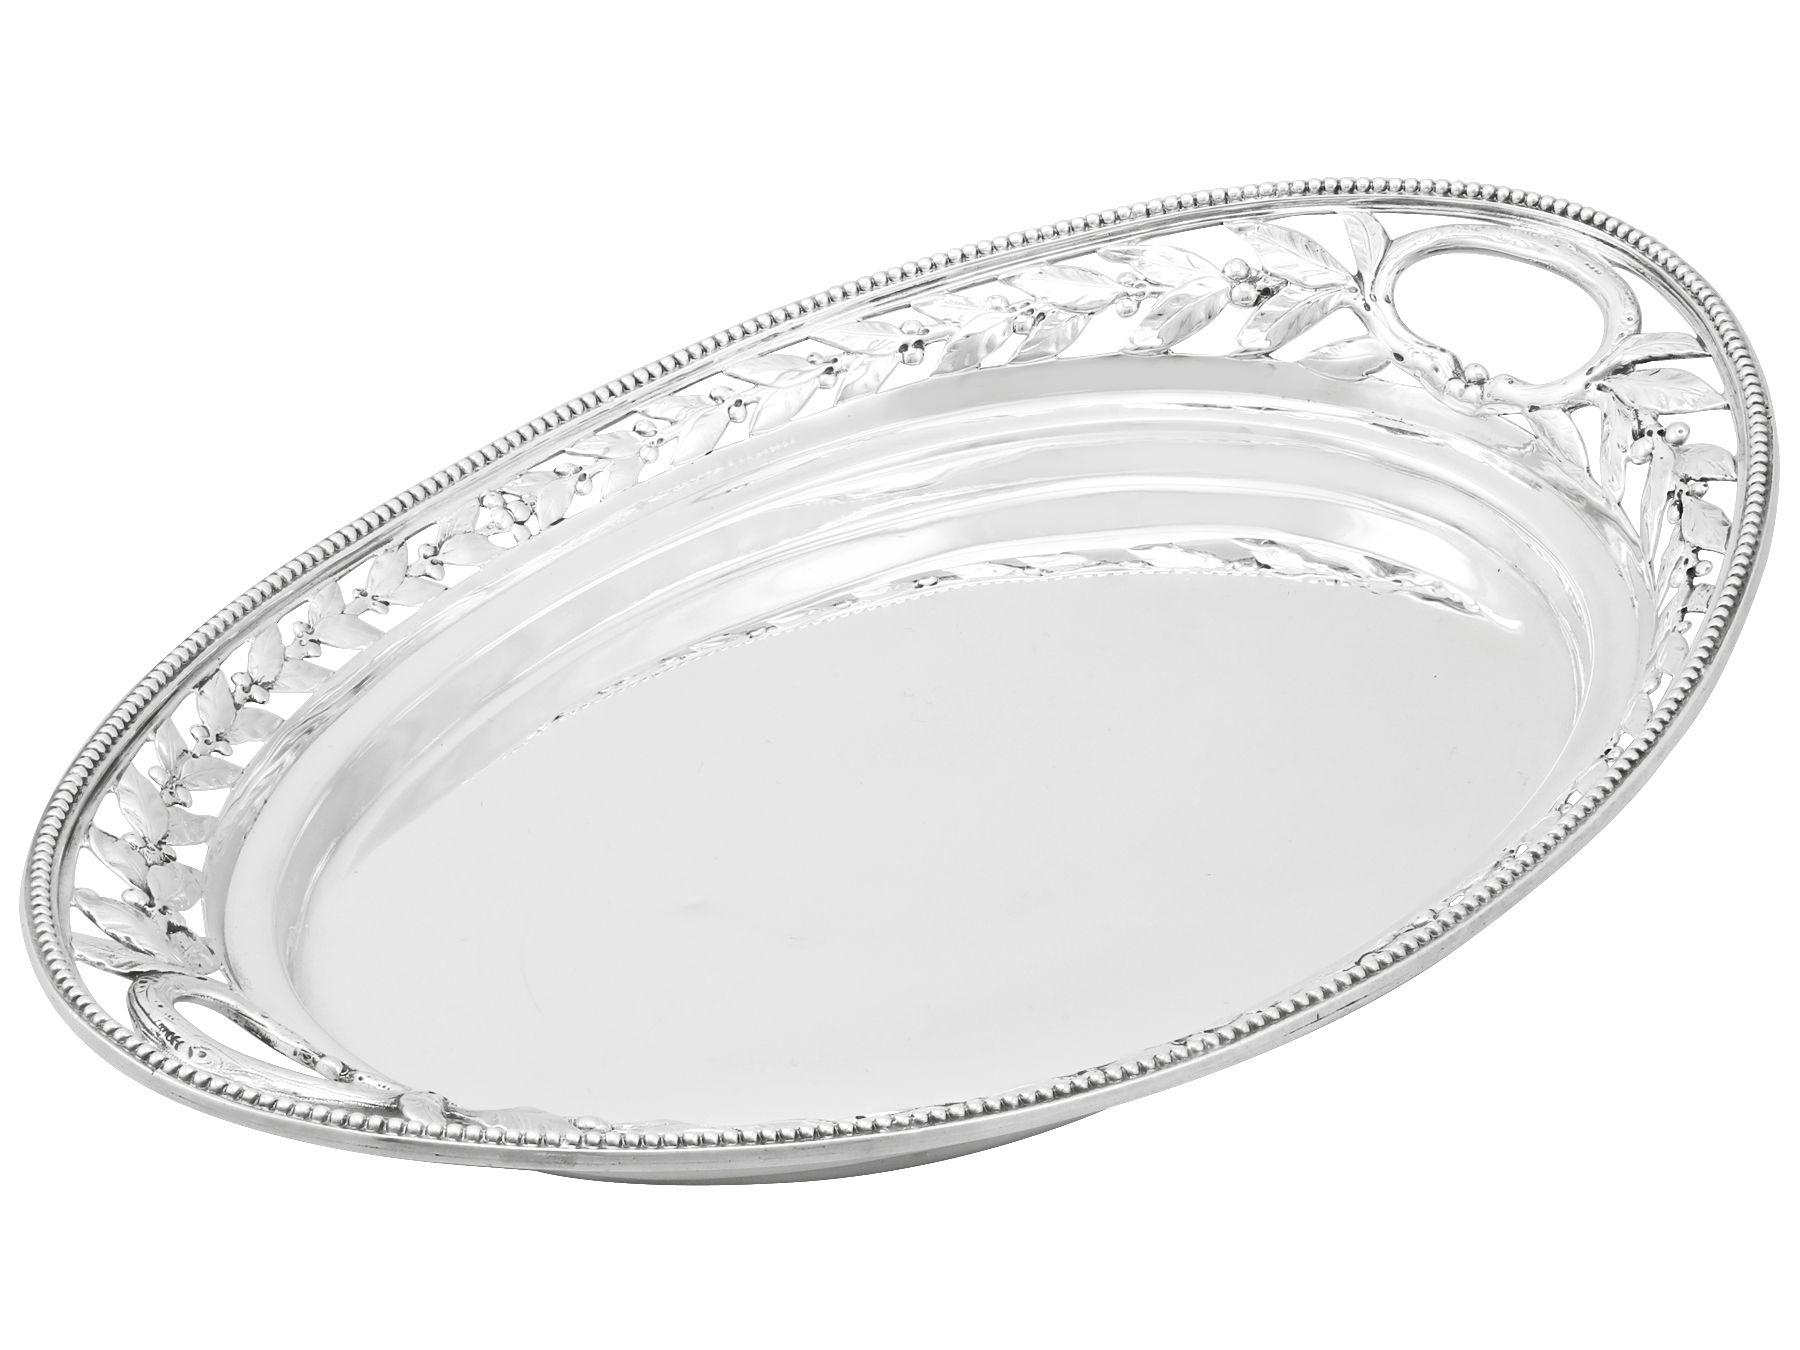 Antique Victorian 1879 Sterling Silver Galleried Drinks Tray In Excellent Condition For Sale In Jesmond, Newcastle Upon Tyne